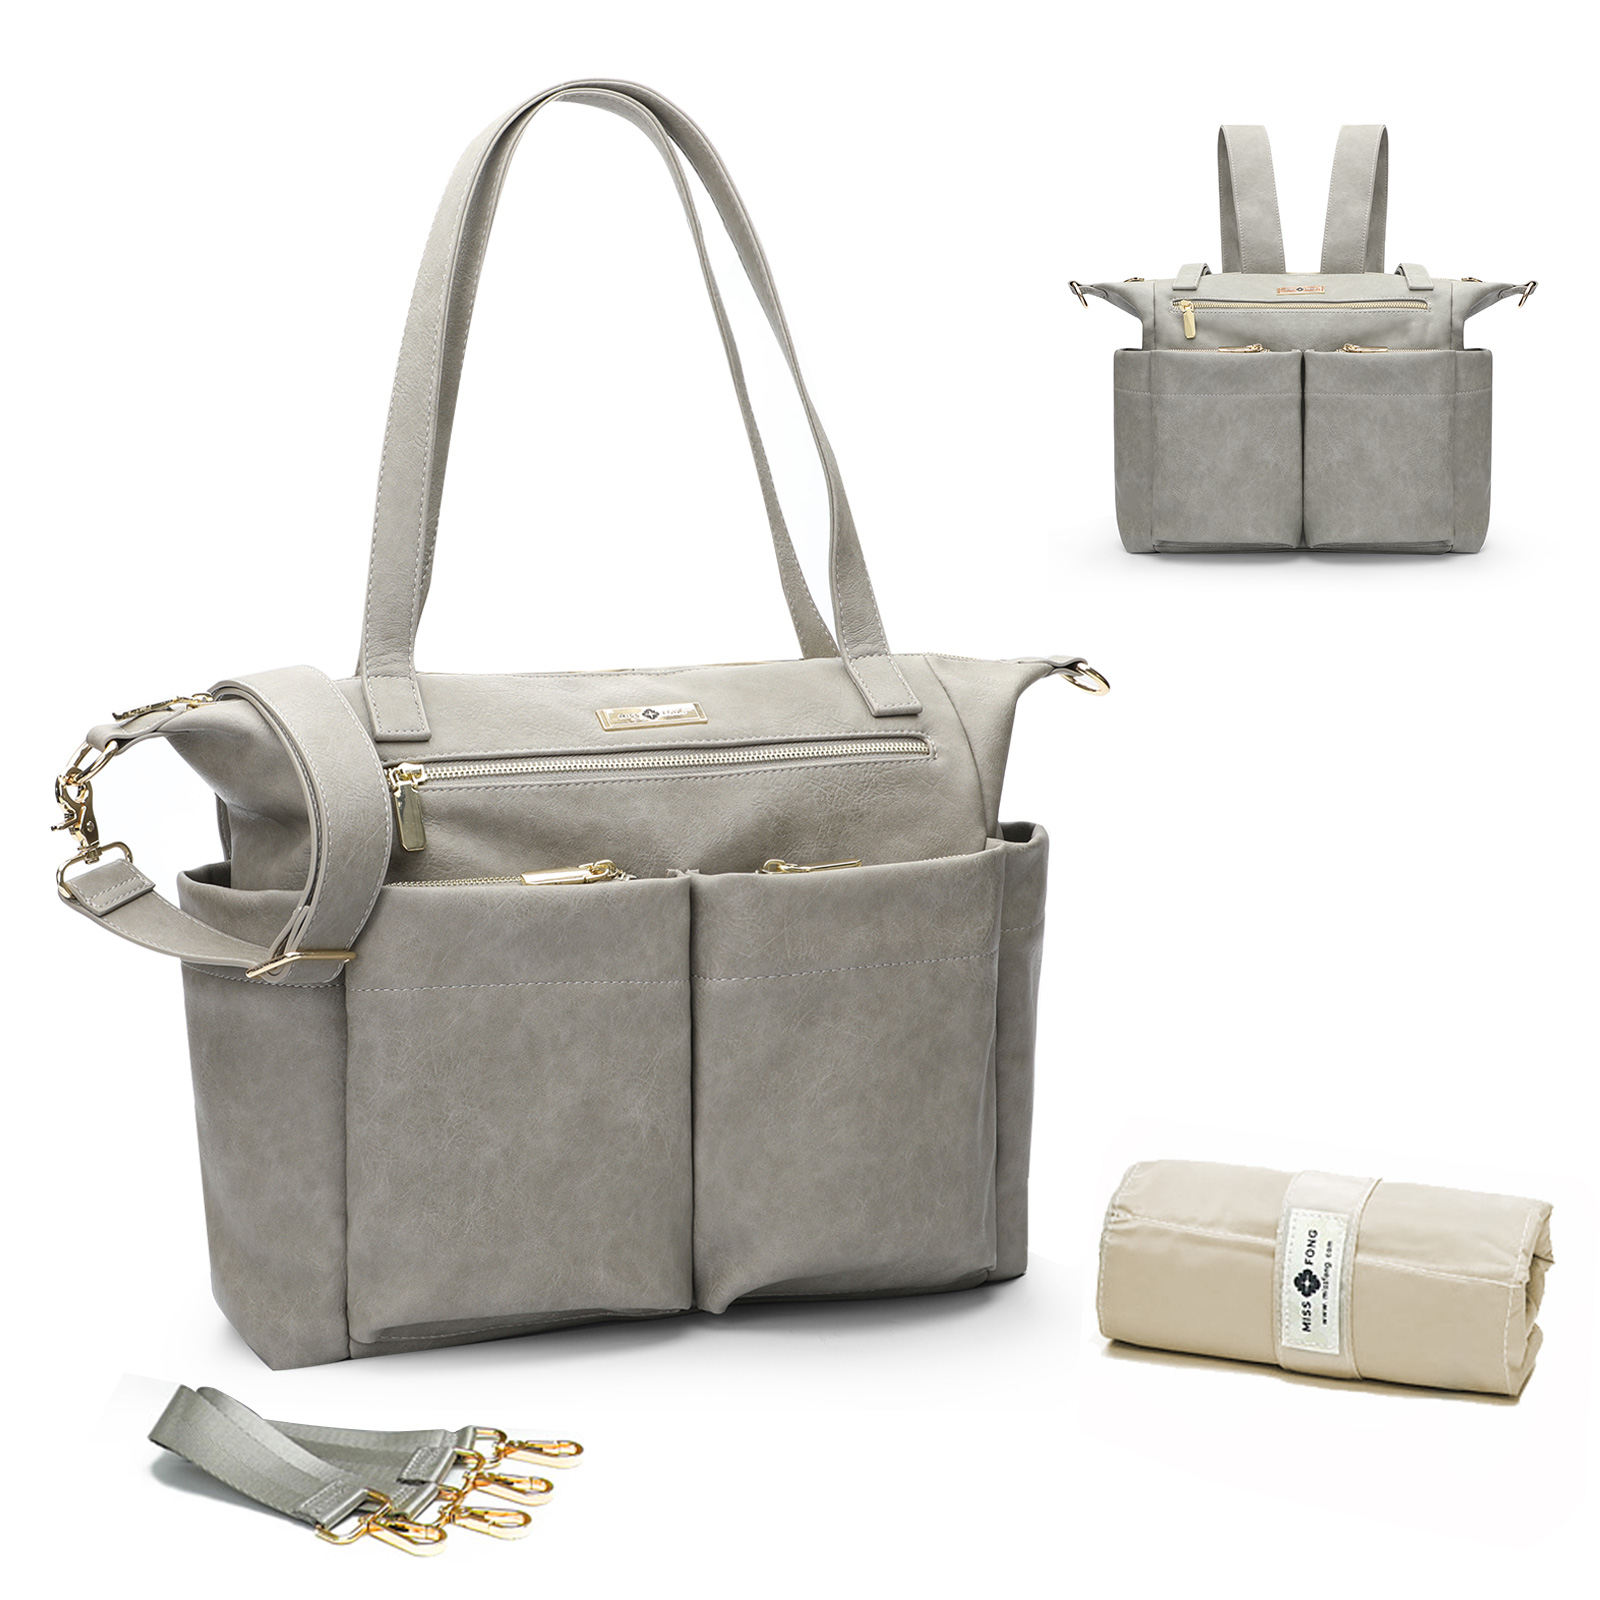 Leather Diaper Bag Backpack Tote By Miss Fong (Grey)